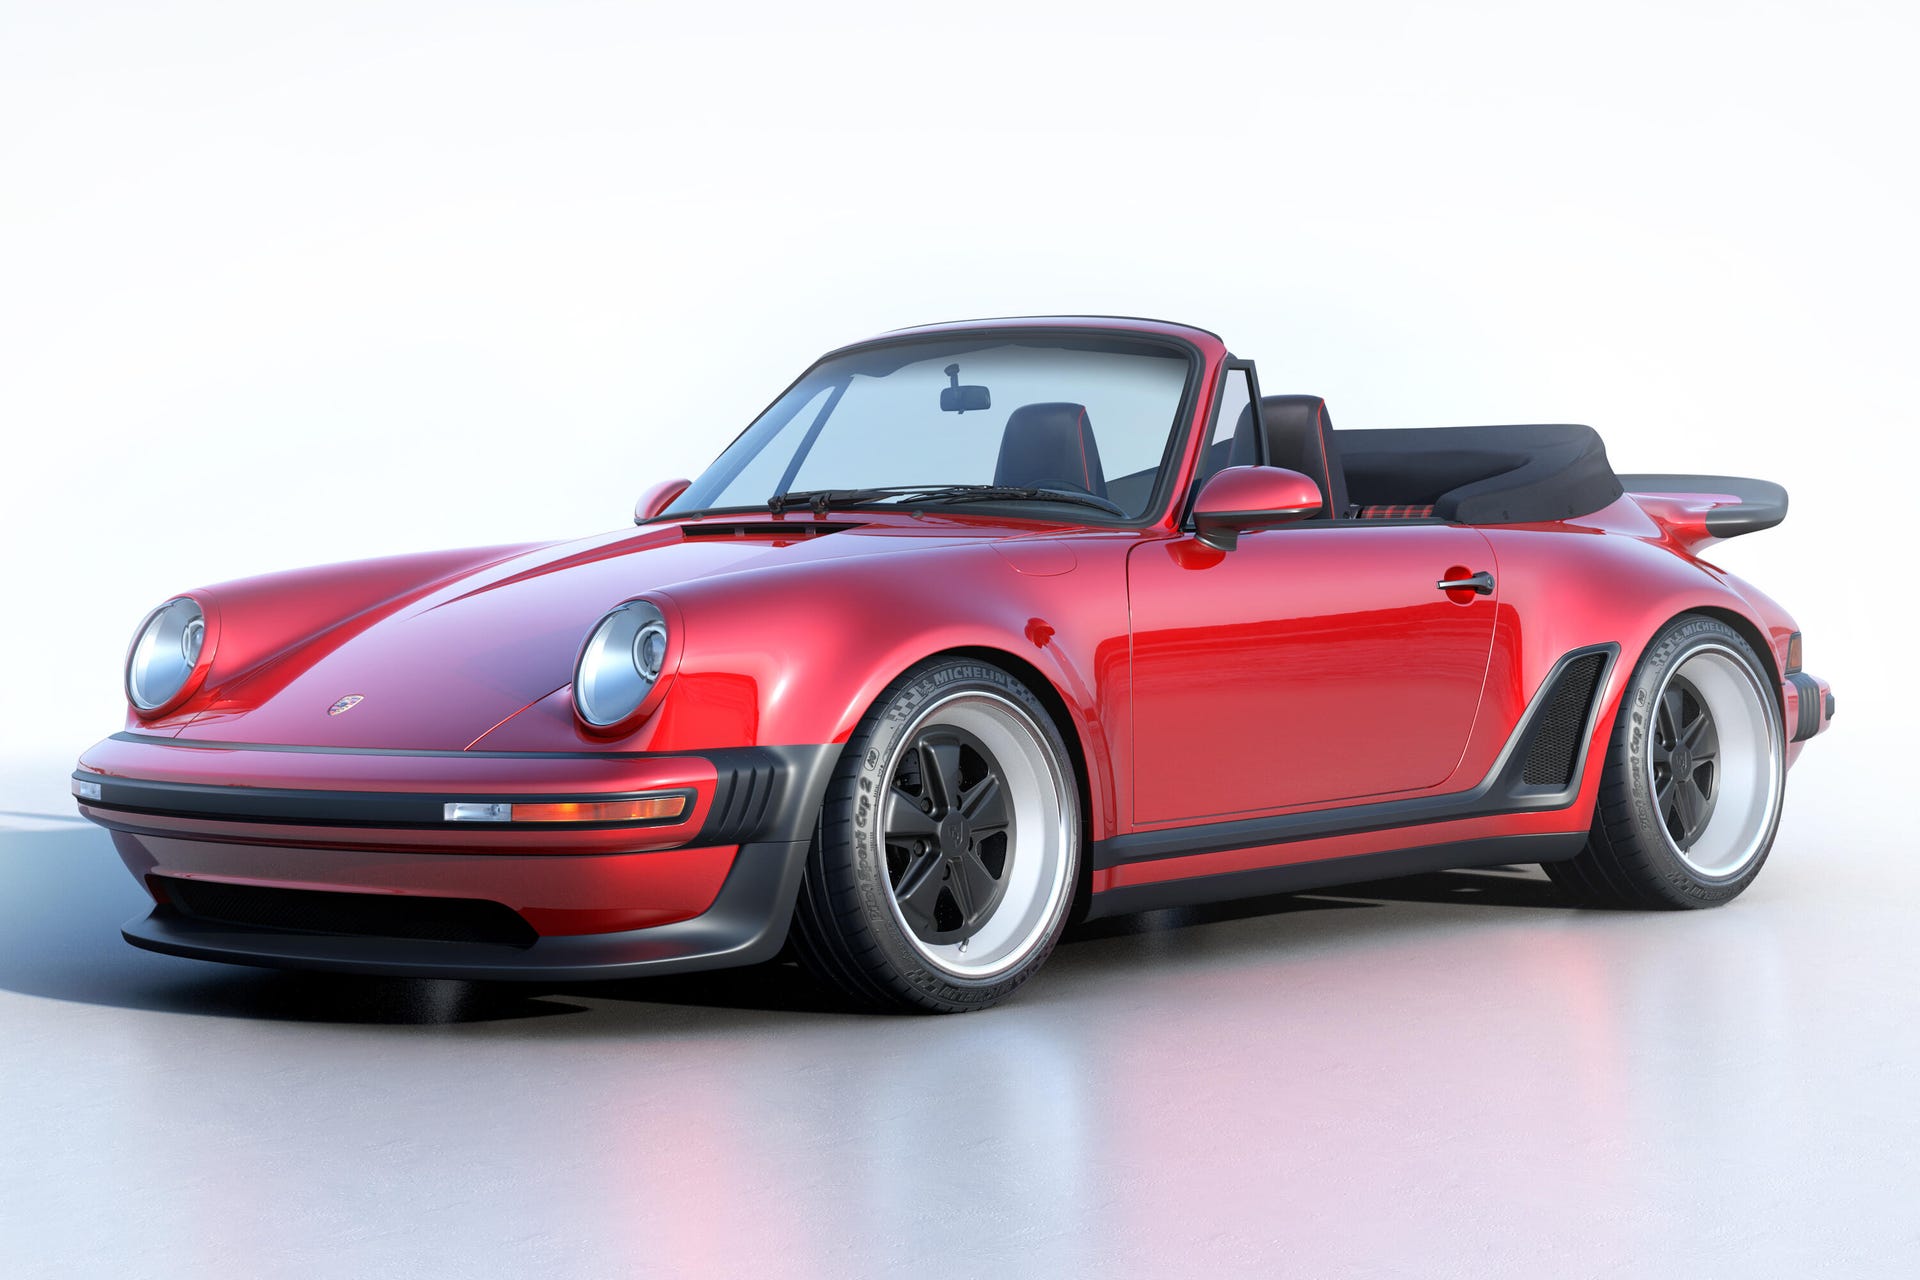 Front 3/4 view of a red Singer Reimagined Porsche 911 Turbo Study Cabriolet